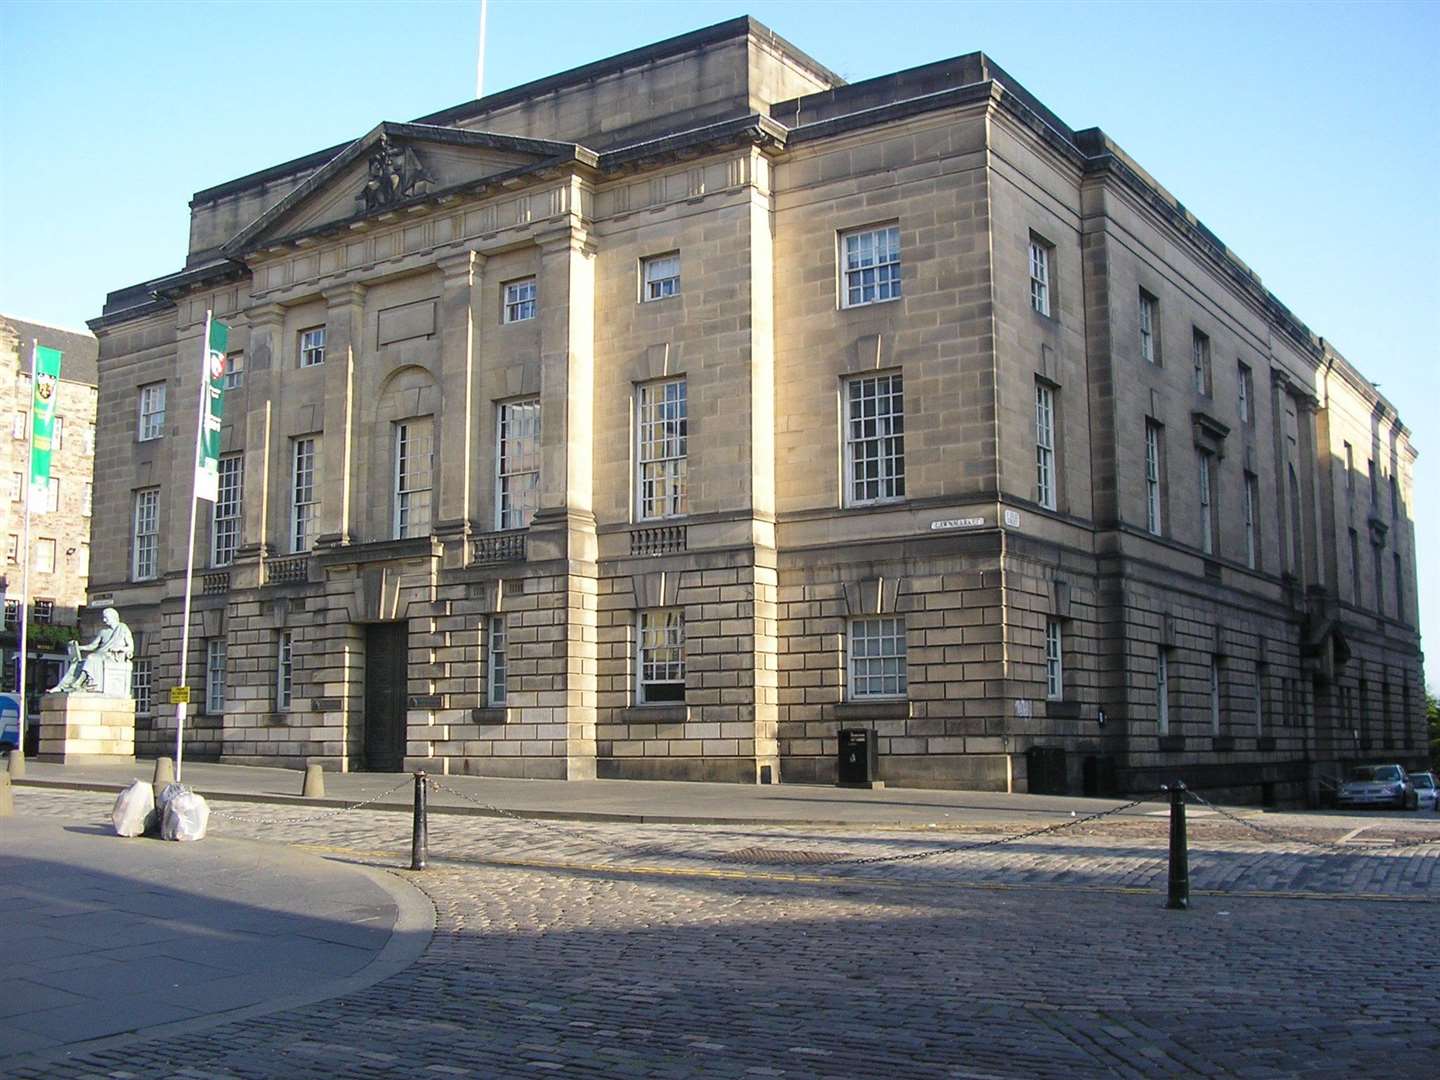 Clarkson was sentenced on May 10 at the High Court in Edinburgh.